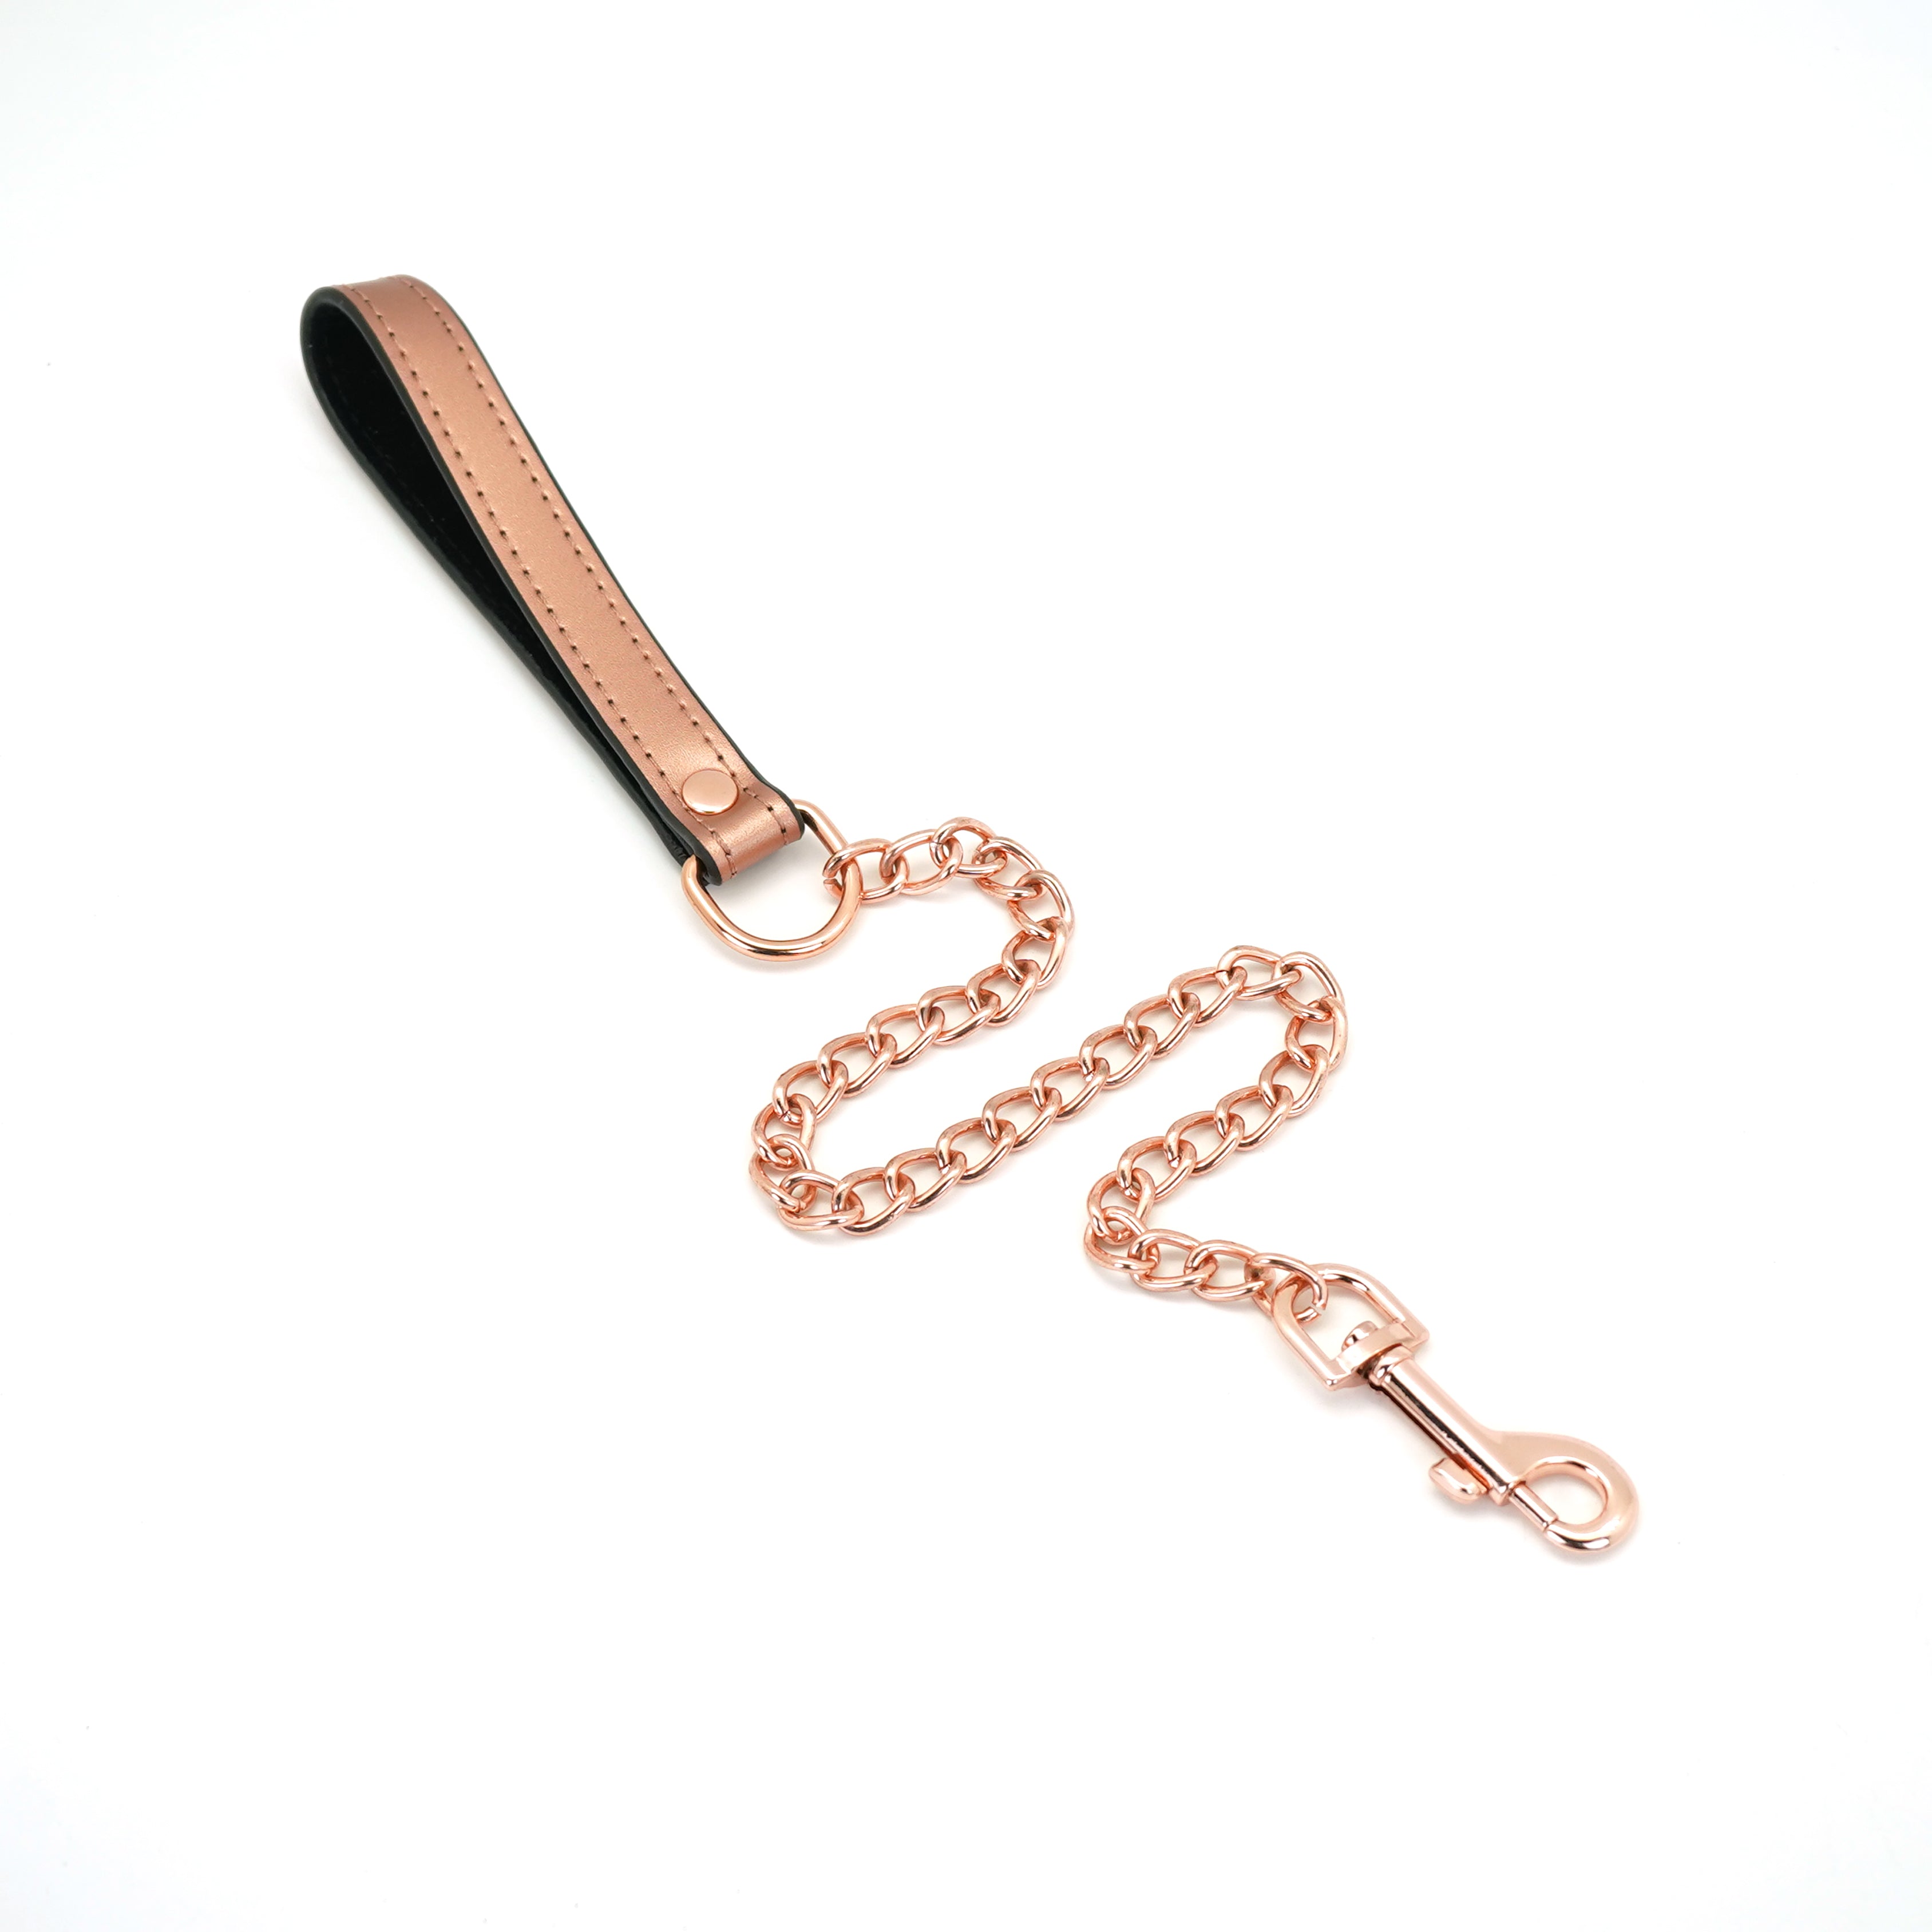 Collar with Leash - Memory: The Rose Gold Luxury BDSM Collection